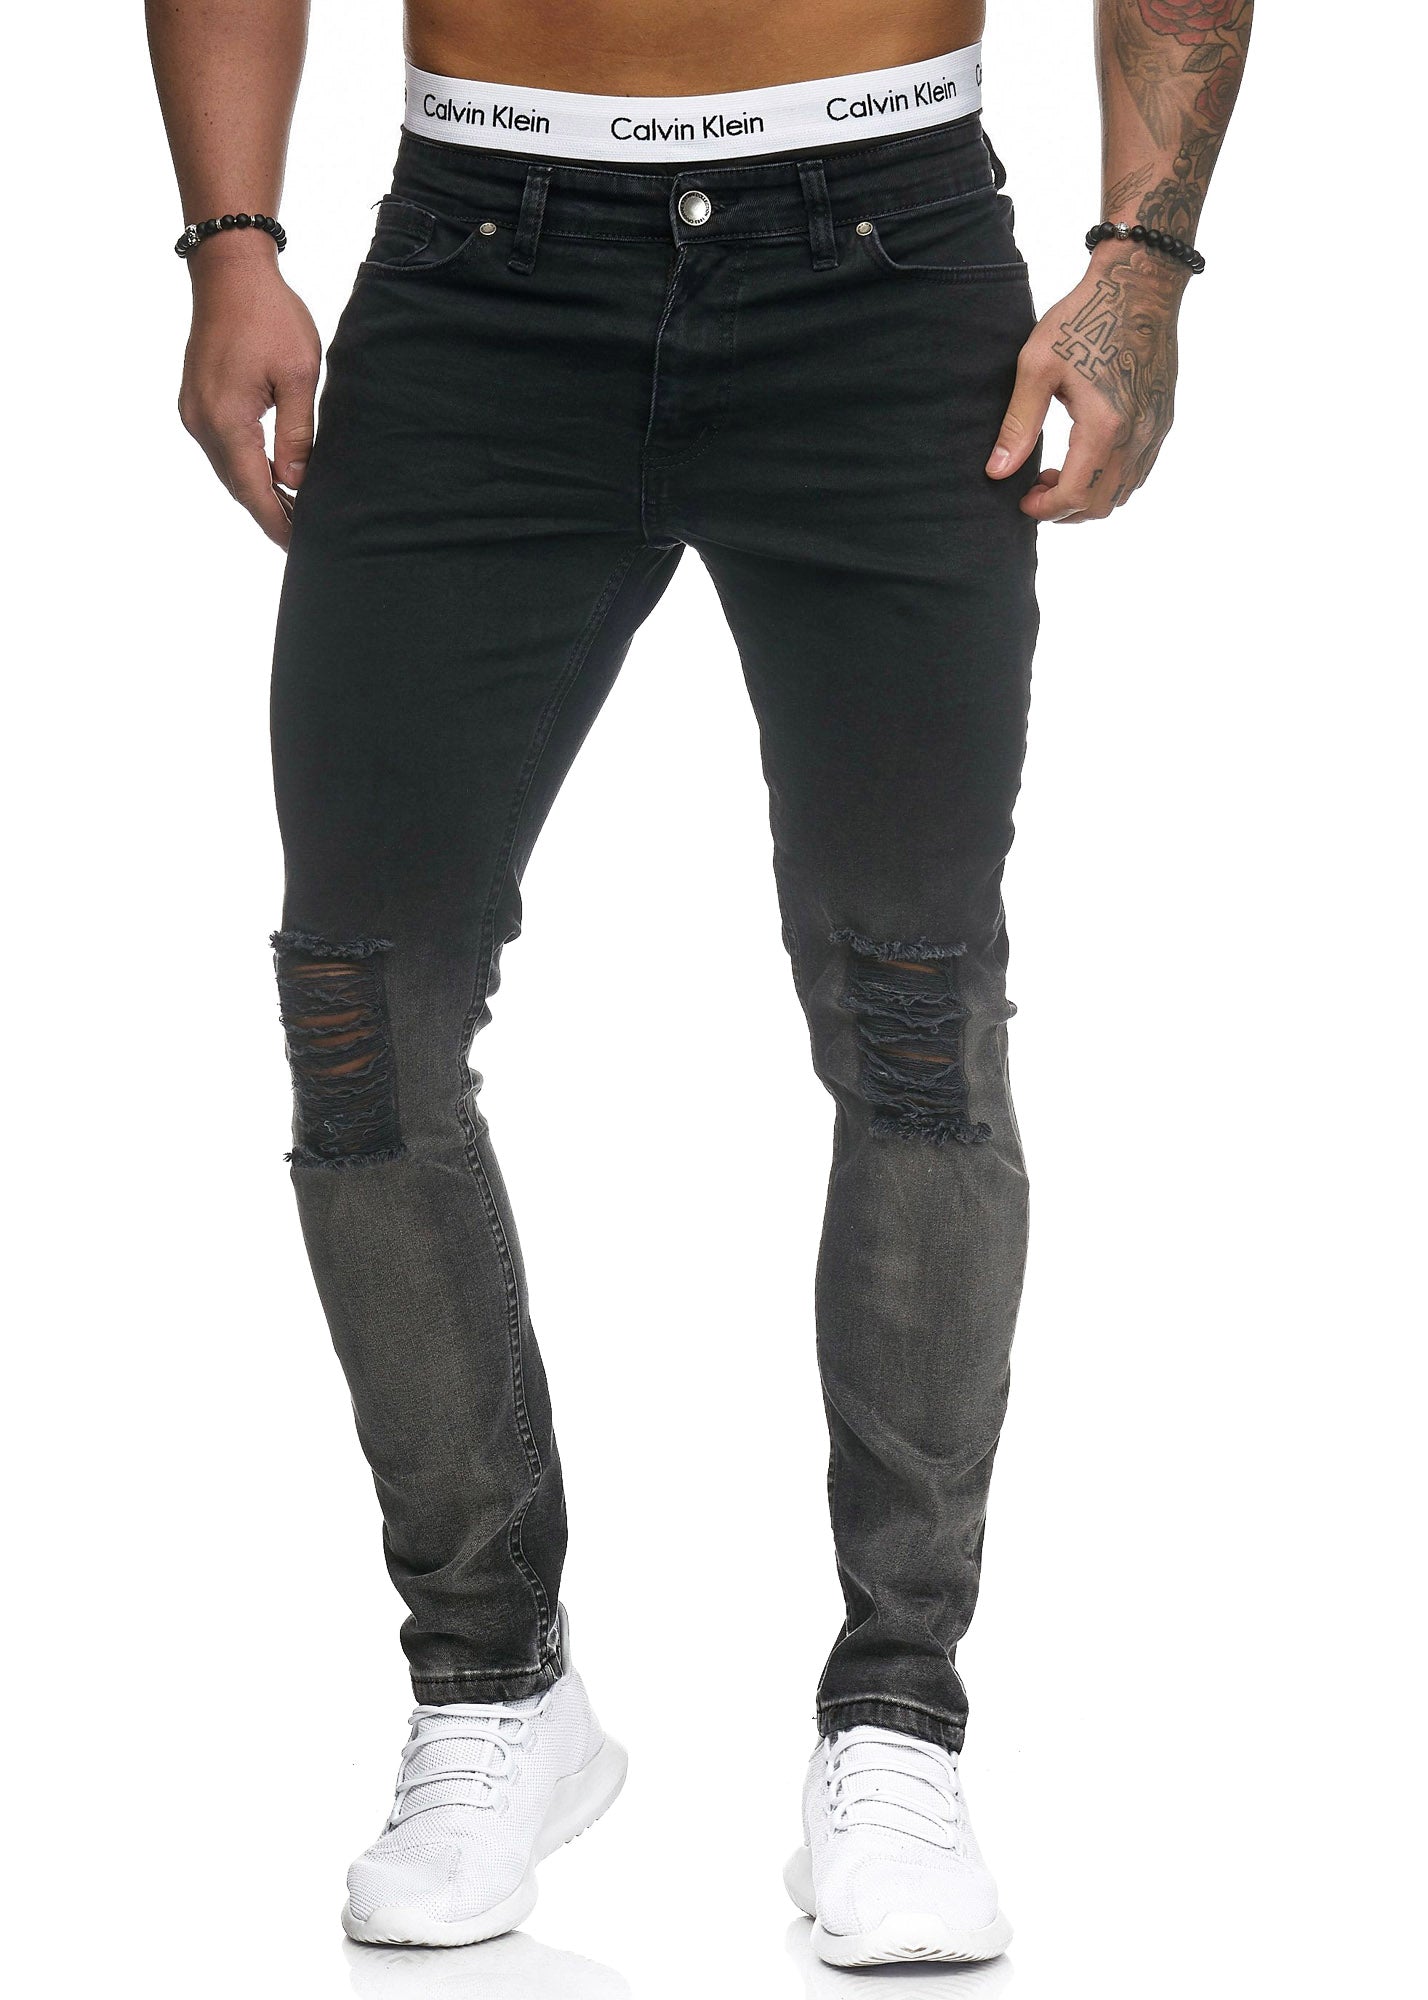 black faded distressed jeans